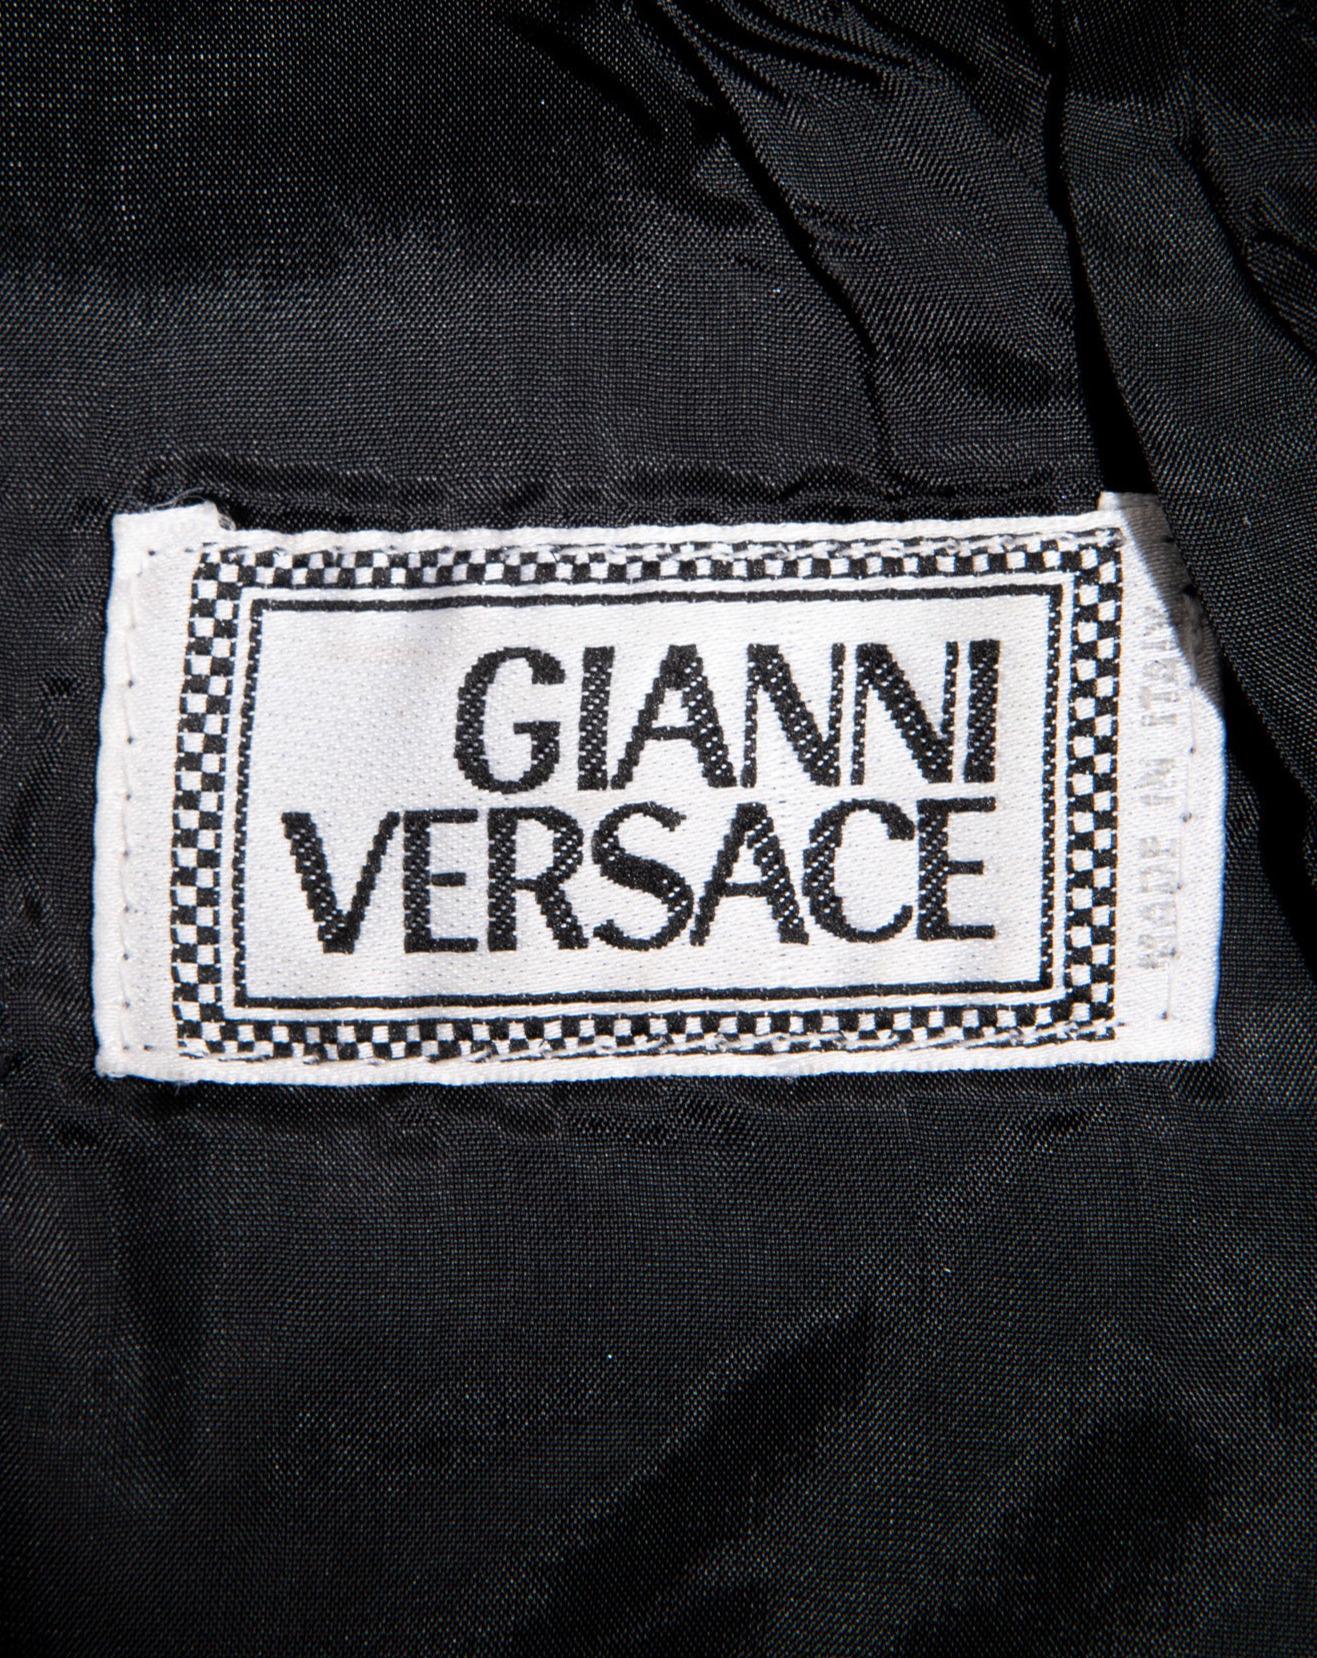 A/W 1992 Gianni Versace Leather Vest, Pant and Belt Set with Gold Stud Details 12